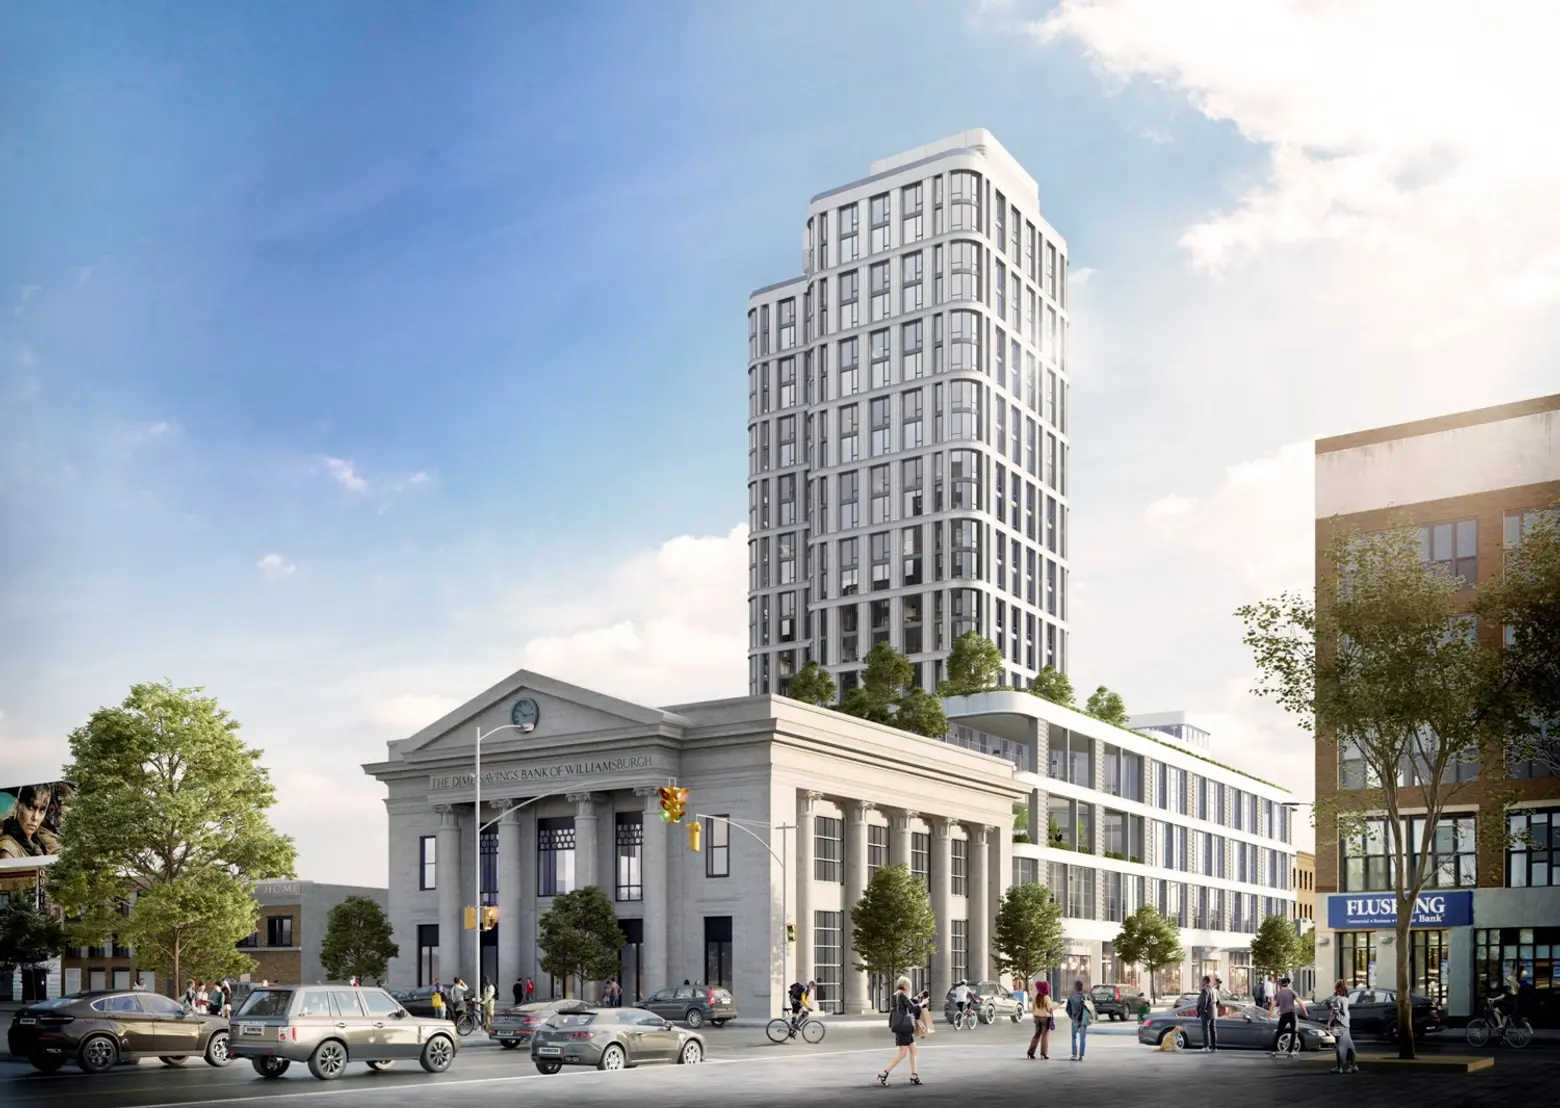 Williamsburg’s Dime Savings Bank restoration and new residential tower get LPC approval